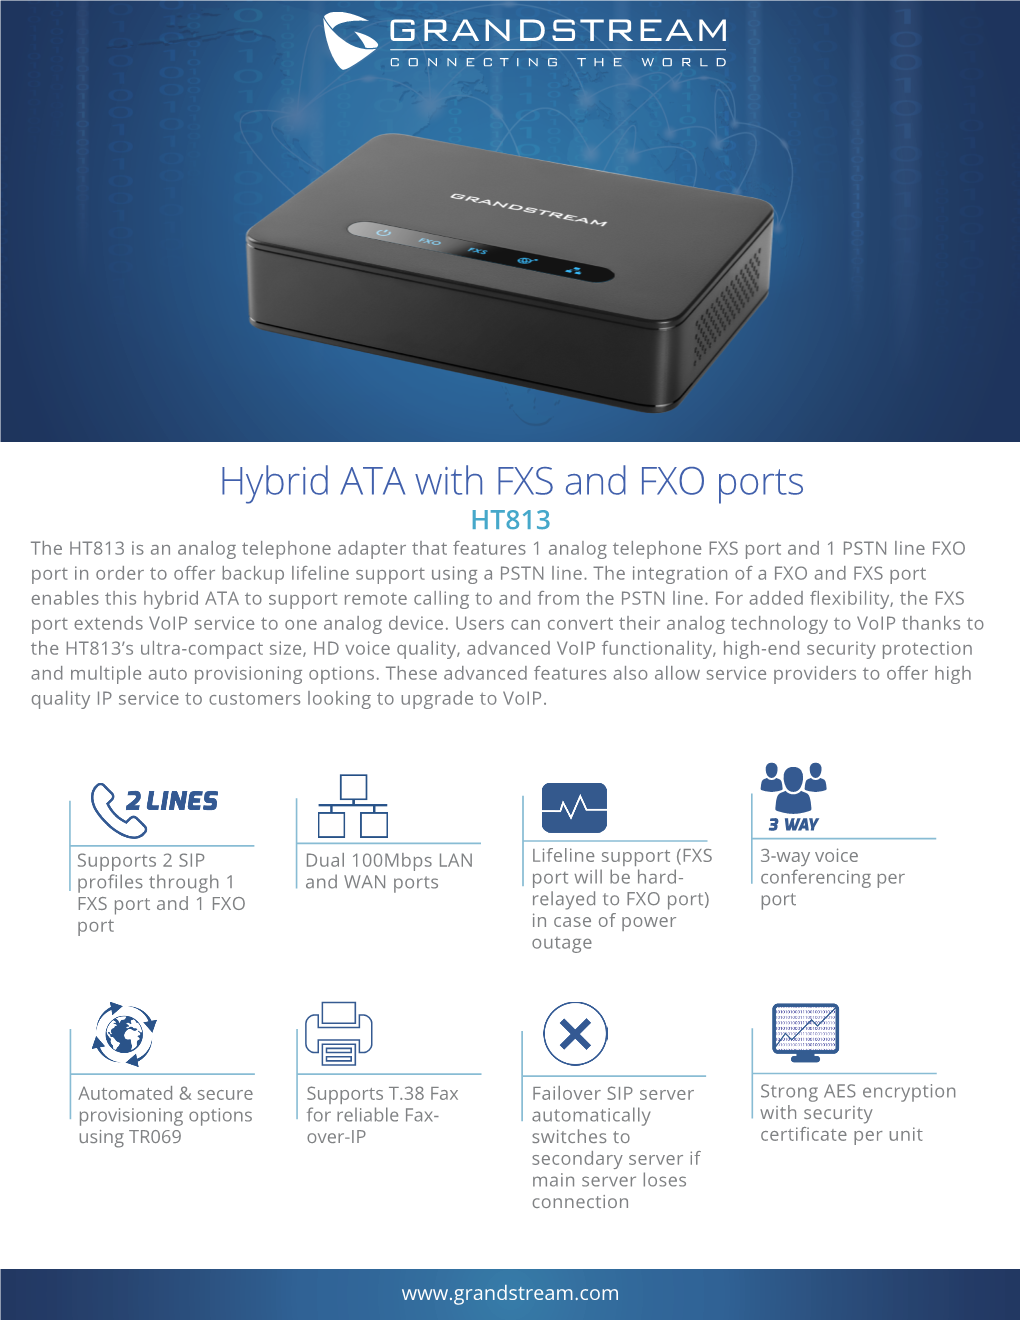 Hybrid ATA with FXS and FXO Ports